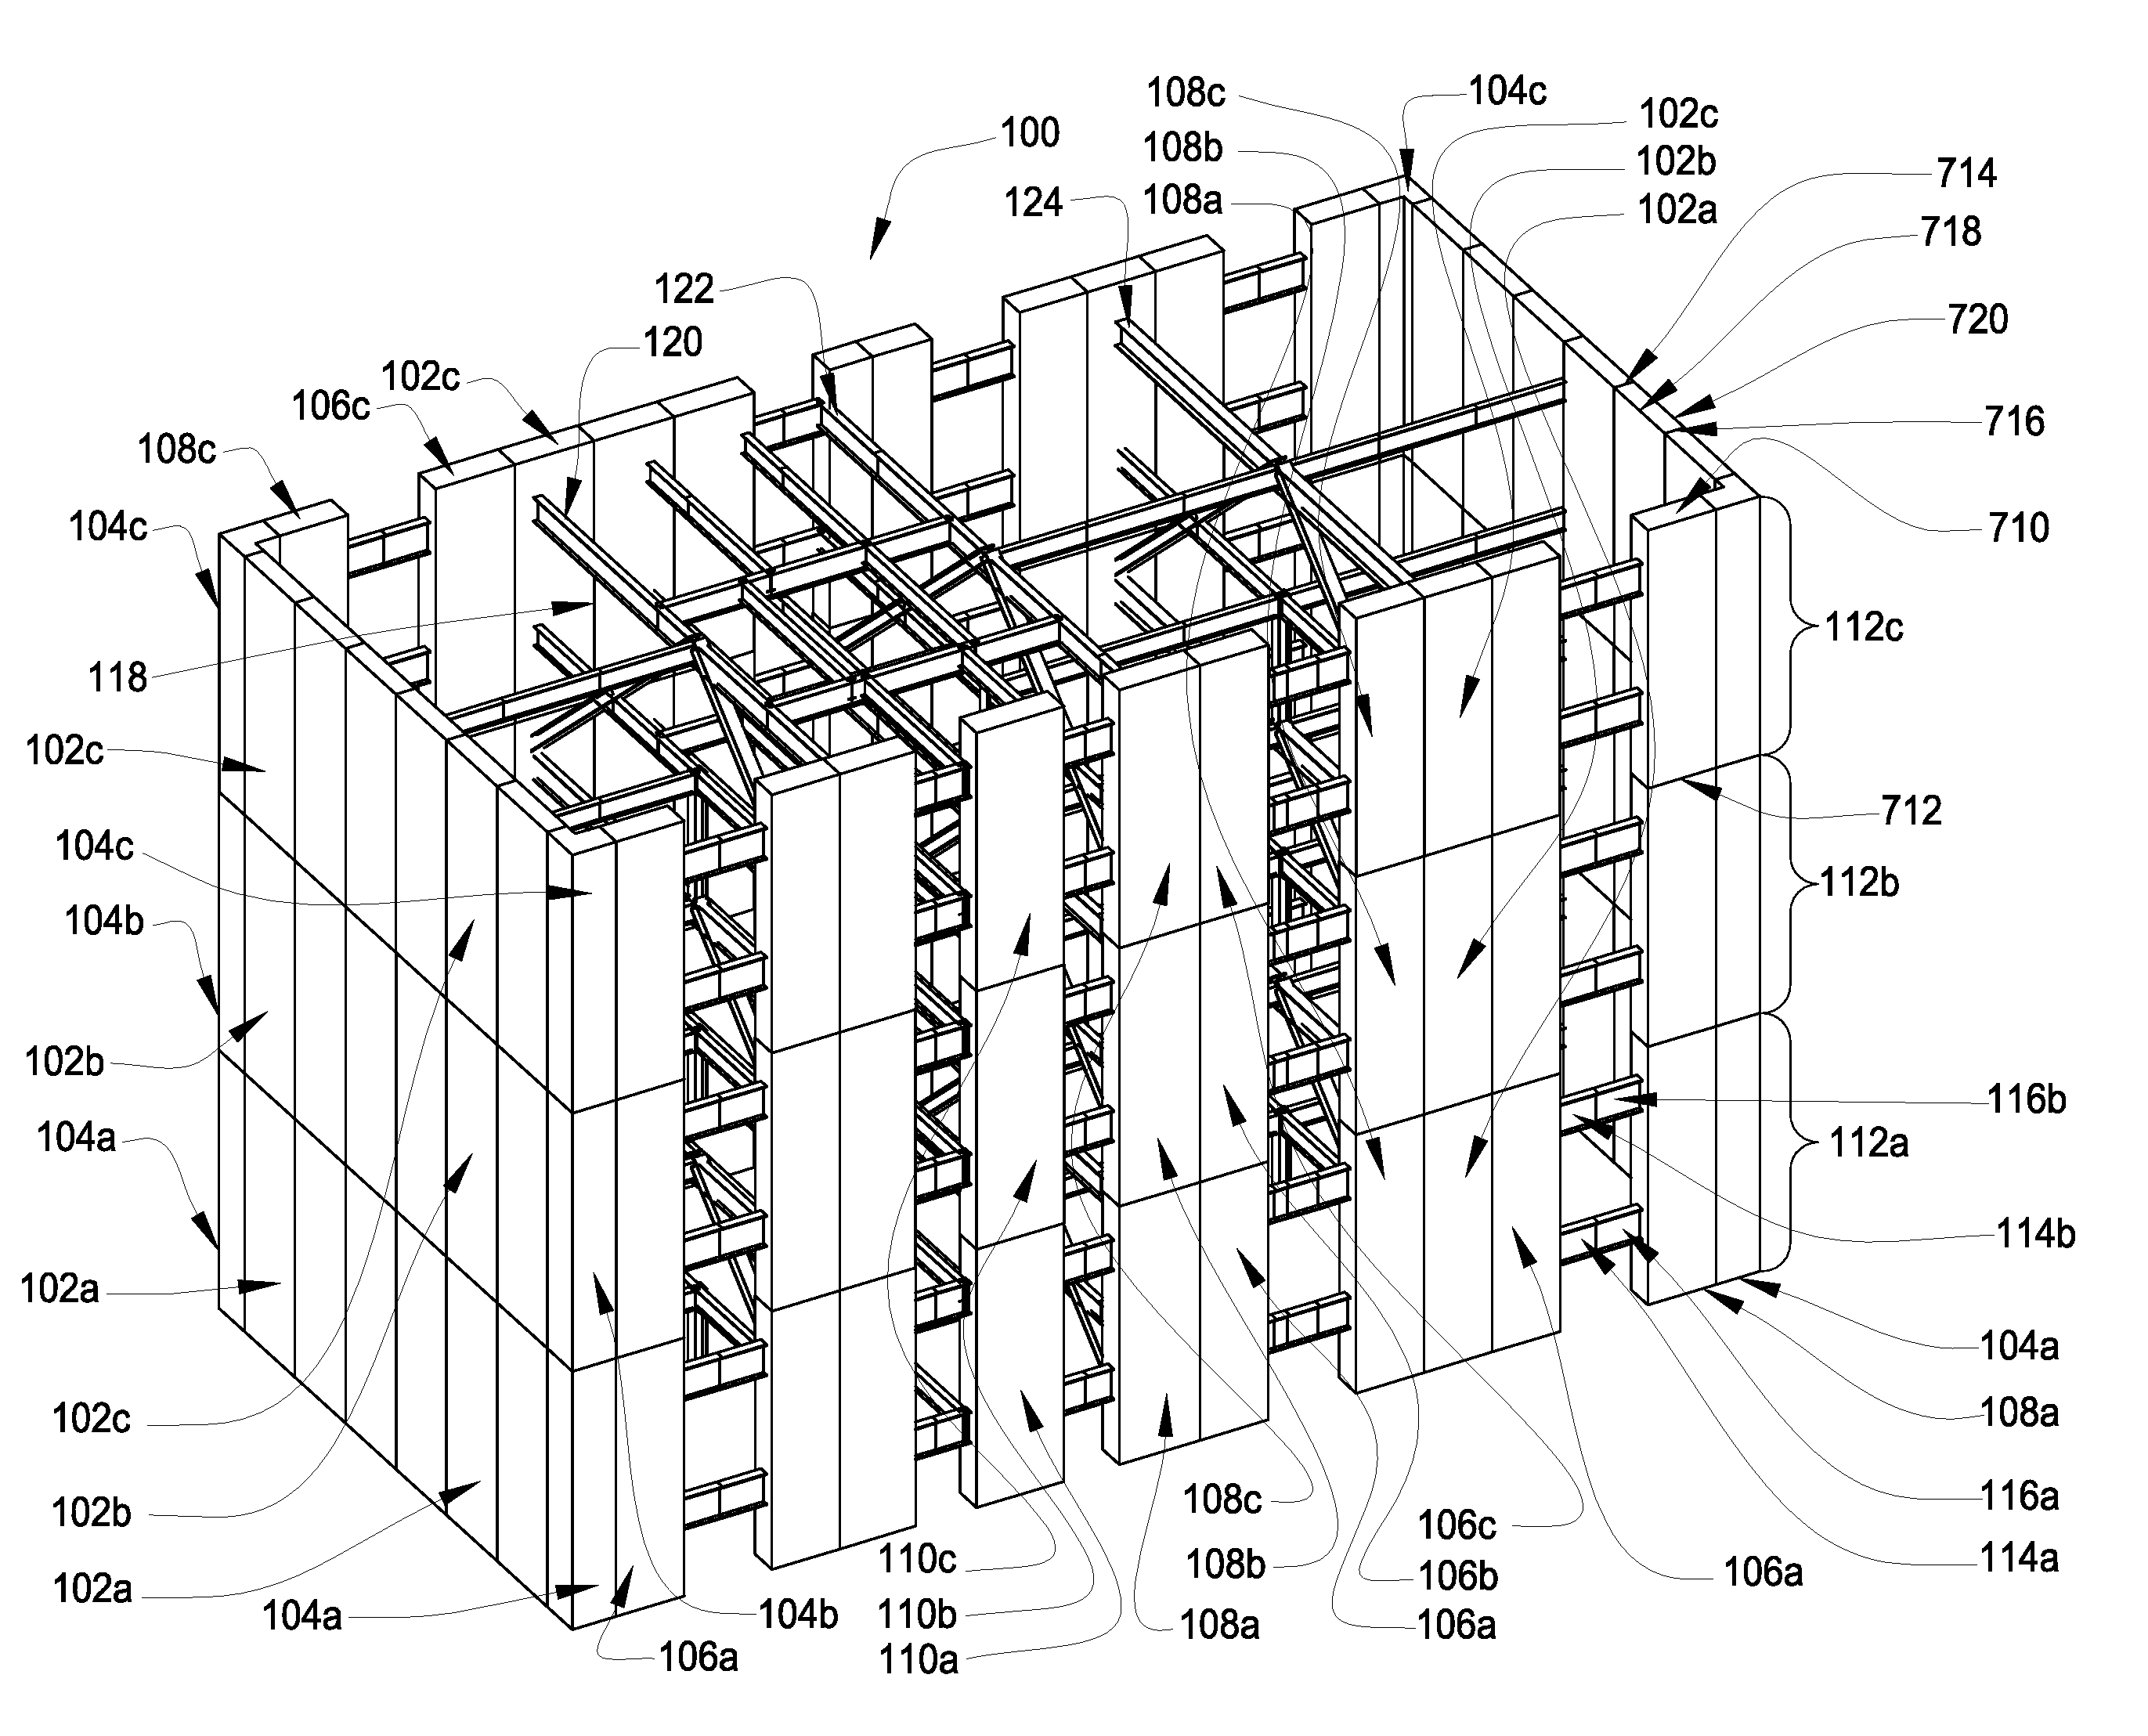 Precast Wall Panels and Method of Erecting a High-Rise Building Using the Panels